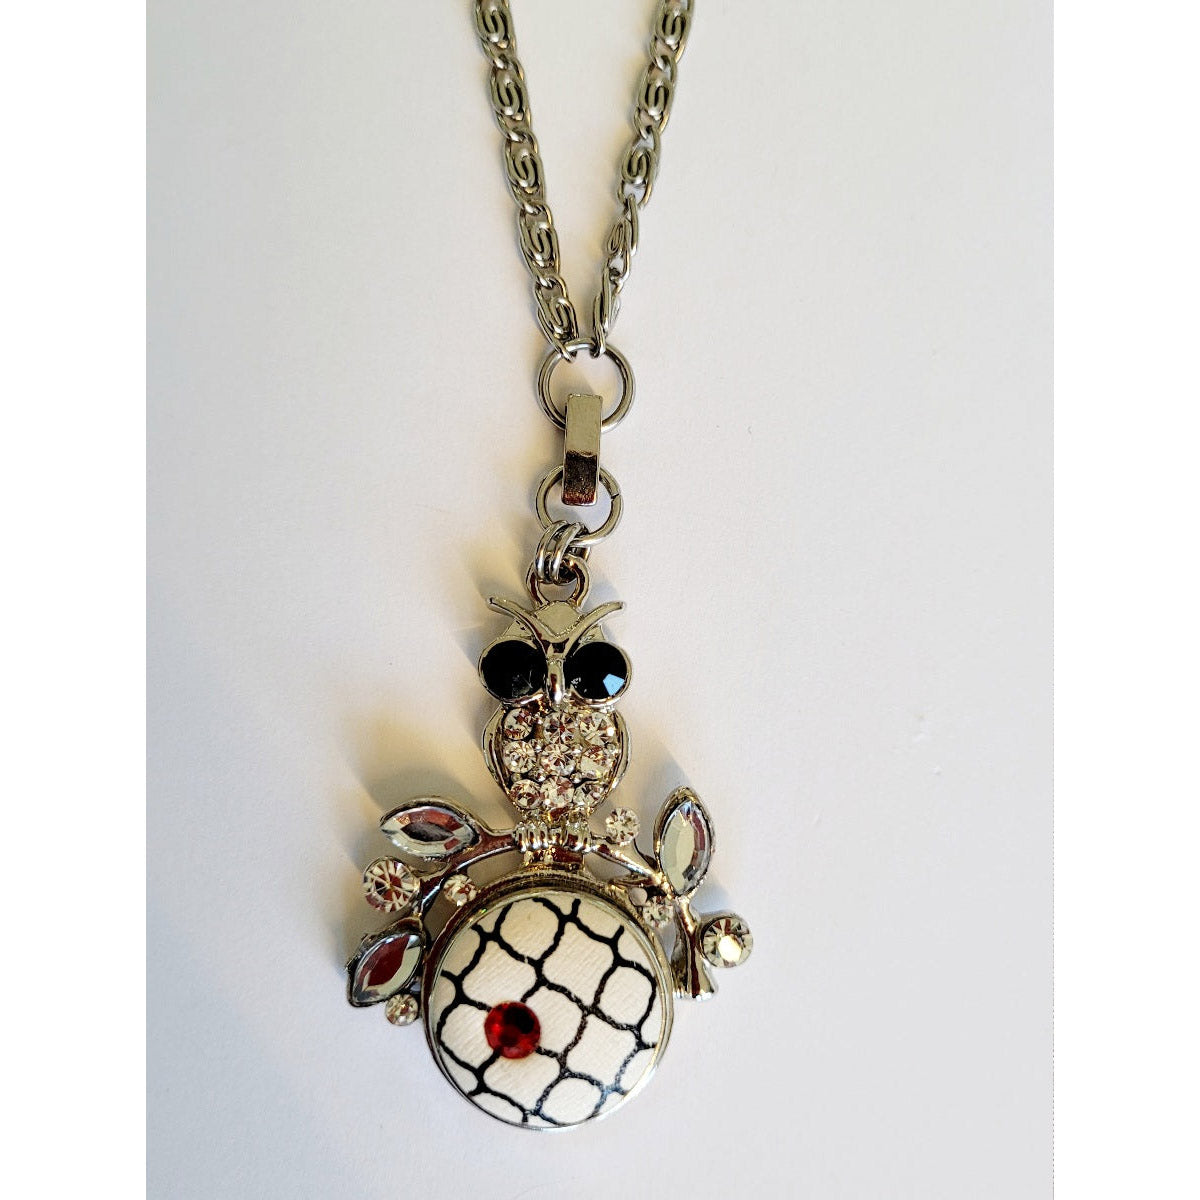 Necklace with detachable owl pendant and snap